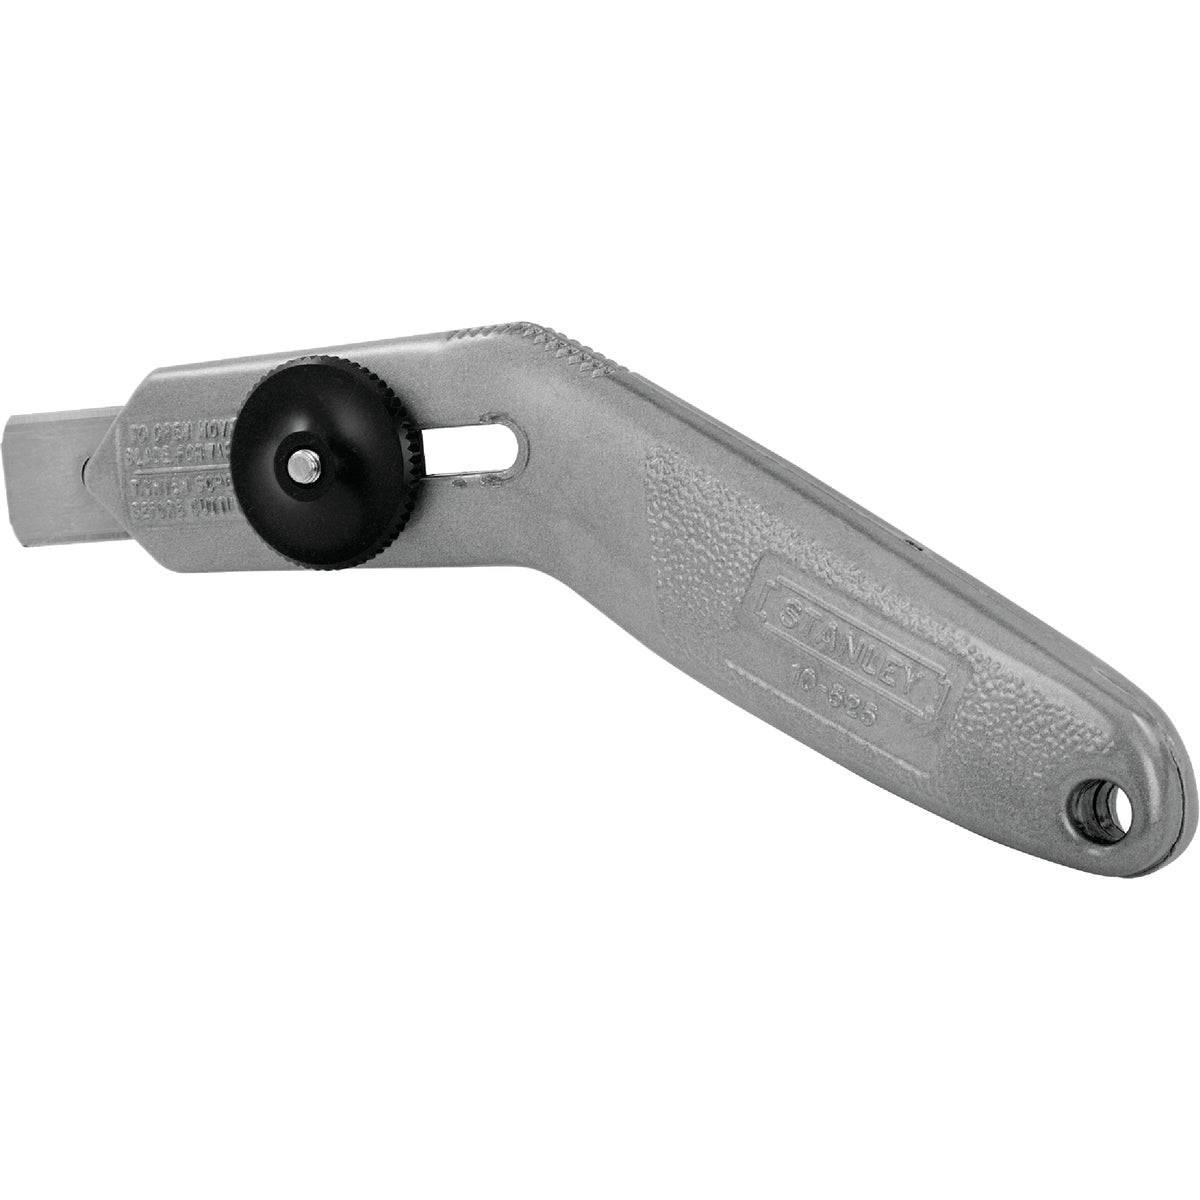 Item 345335, 6-1/2" handle length. Retractable blade for controlling depth of cut.